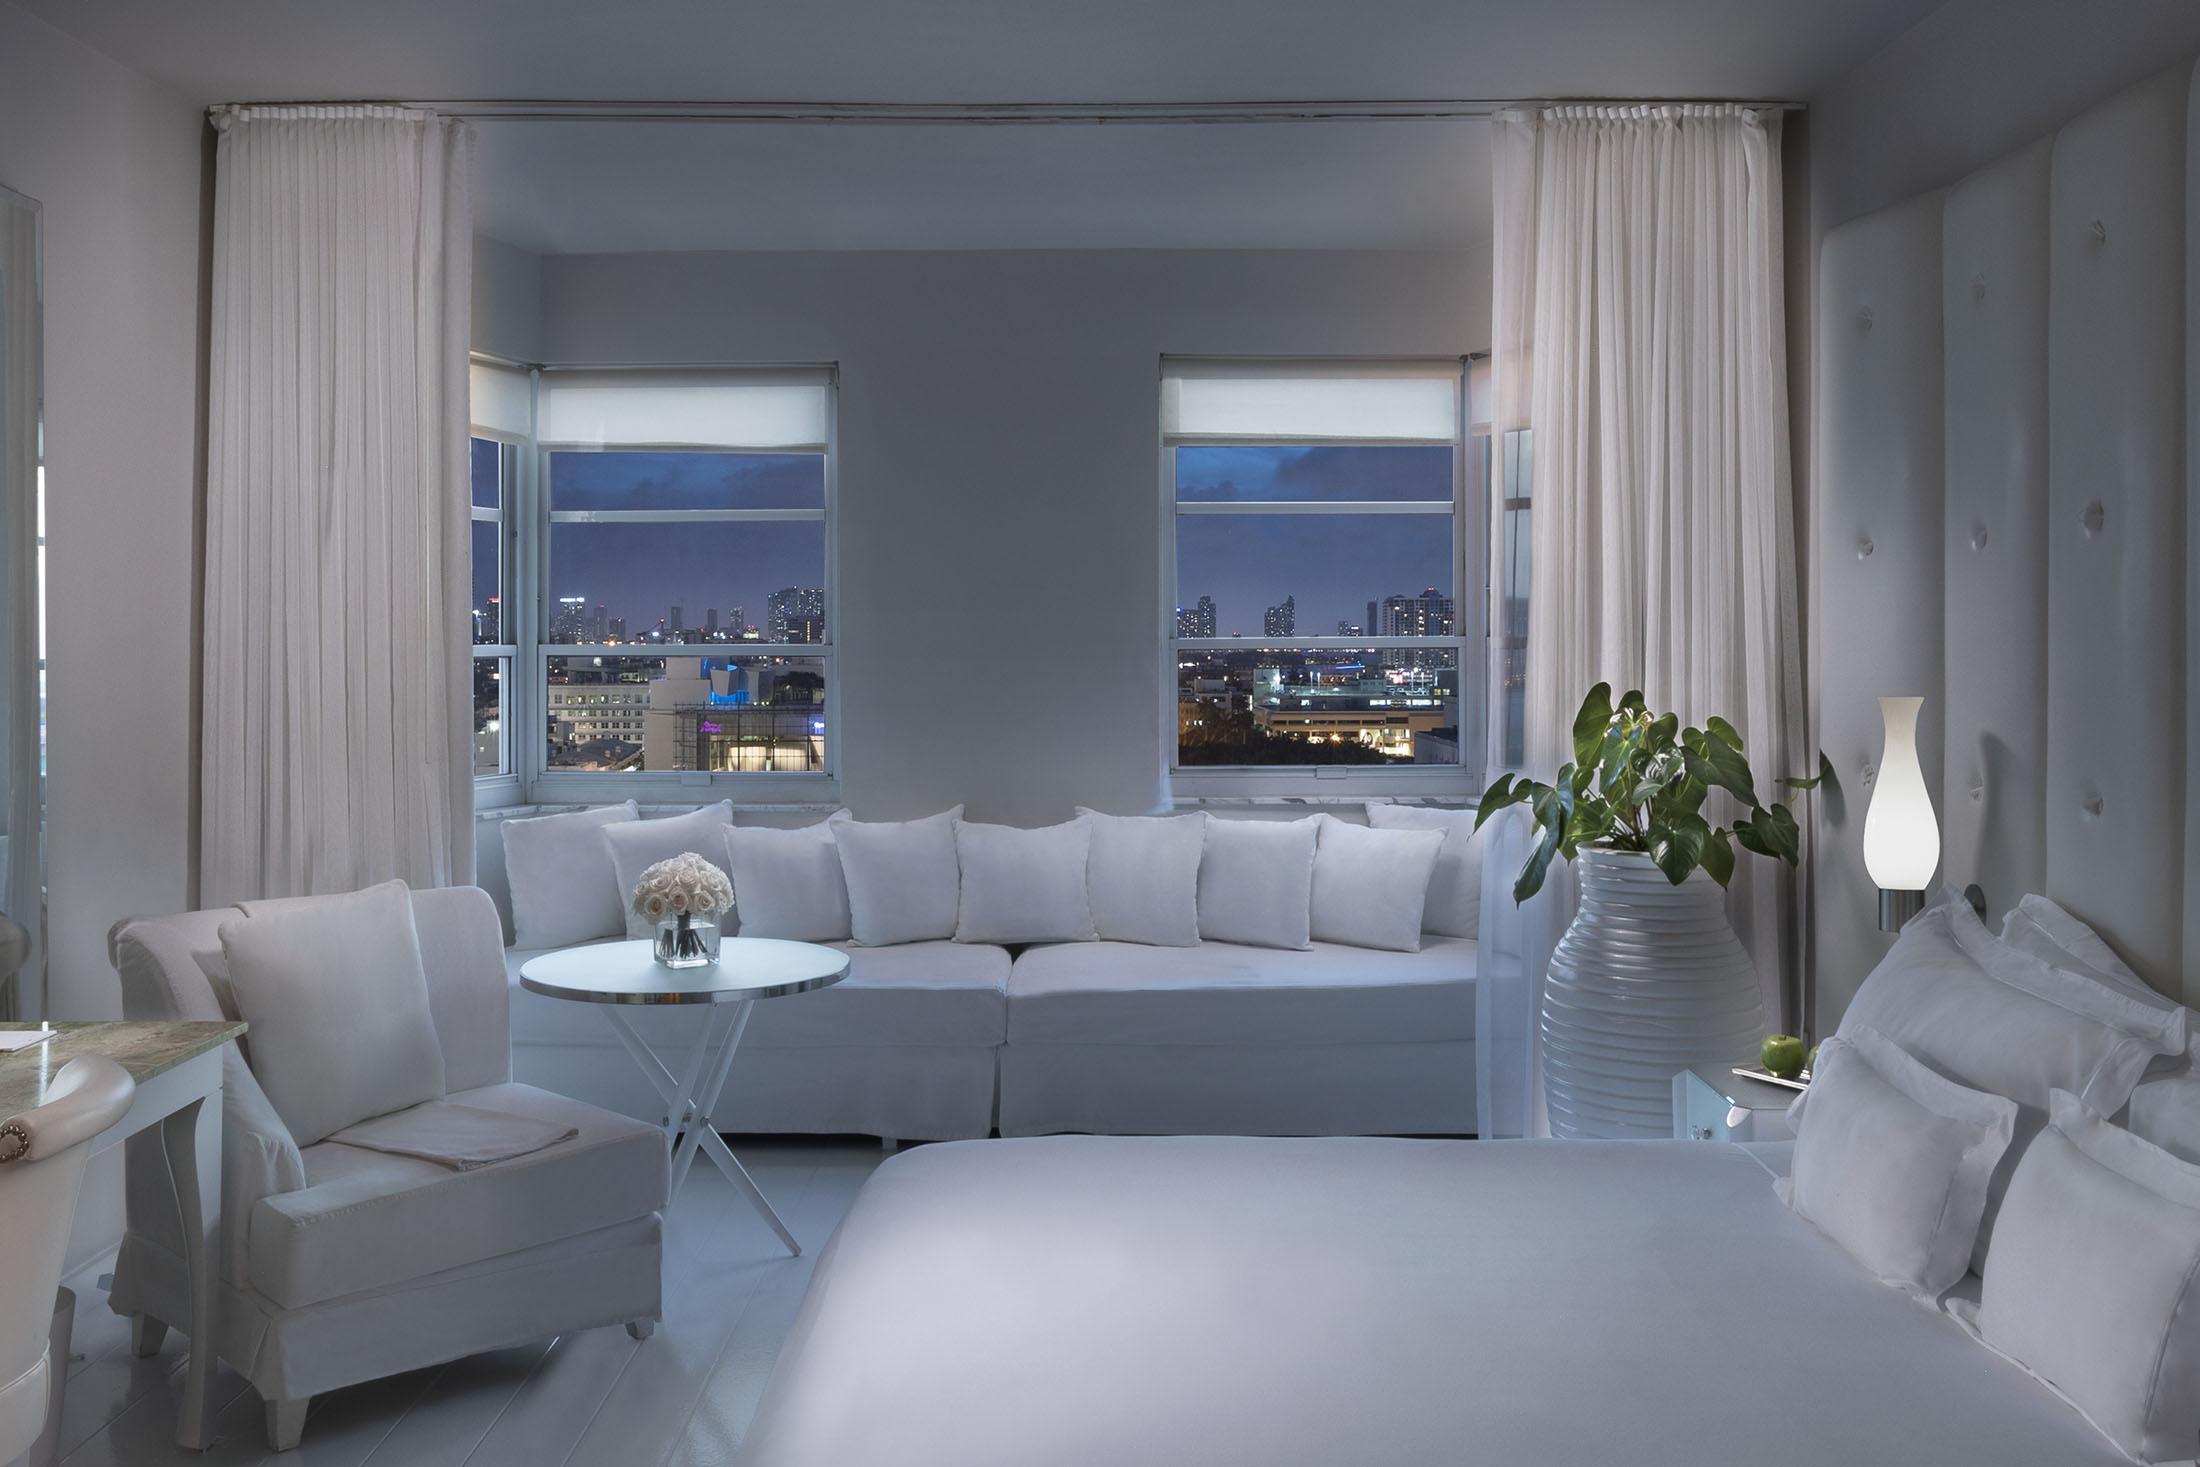 white bed and white sitting alcove in front of window with city view